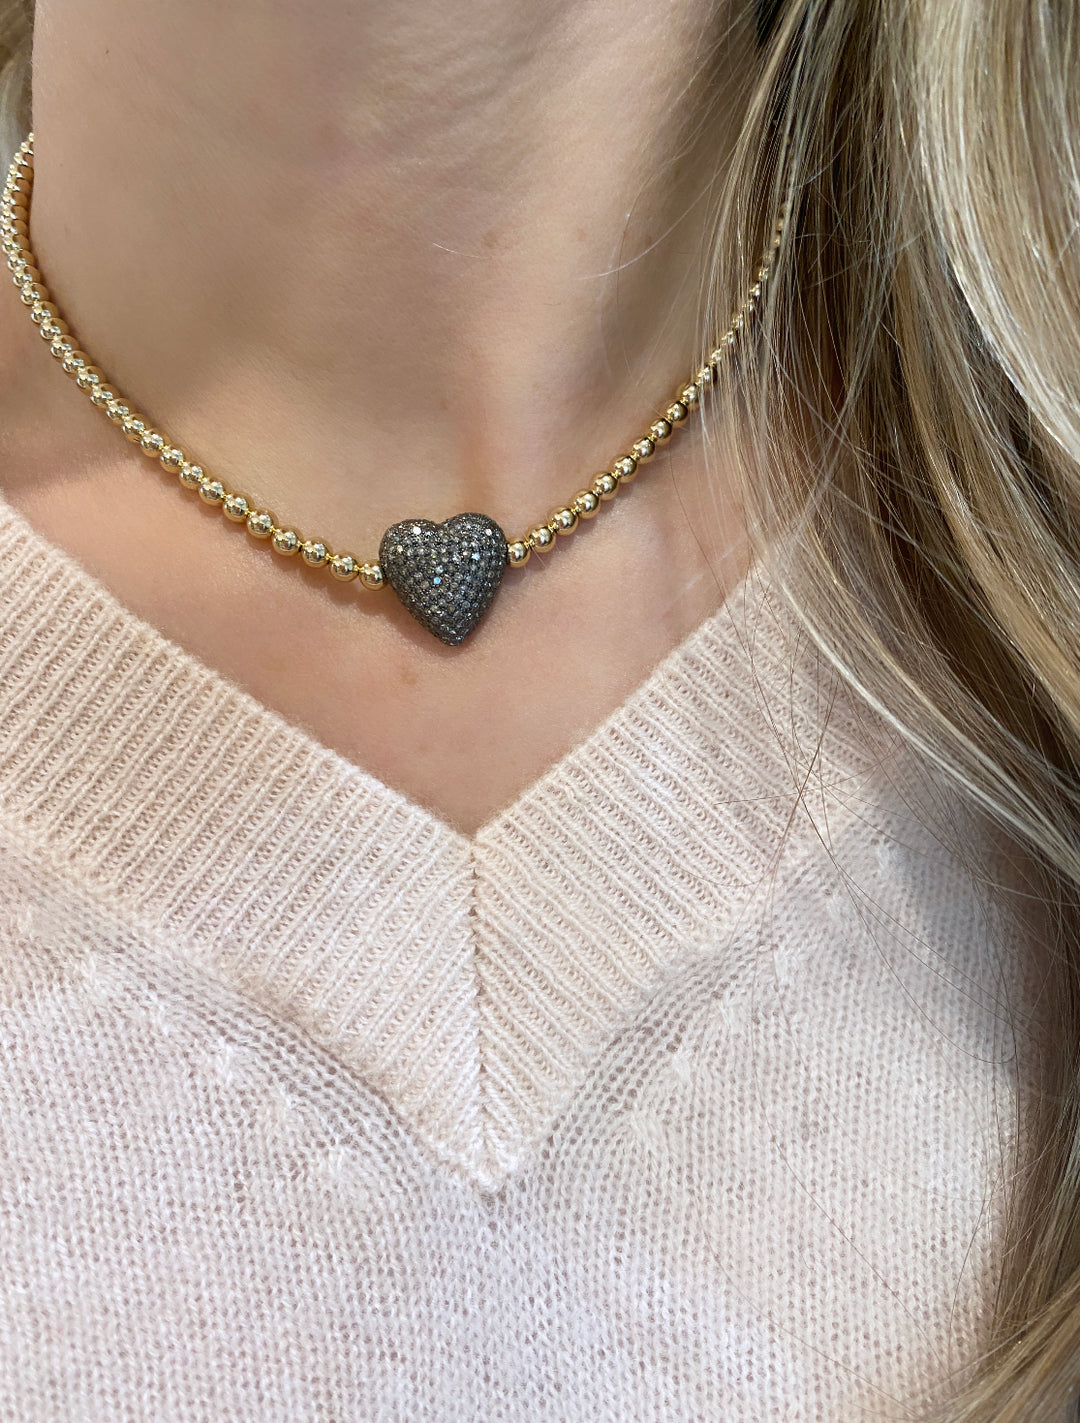 Gold Bead Necklace with Oversized Diamond Heart